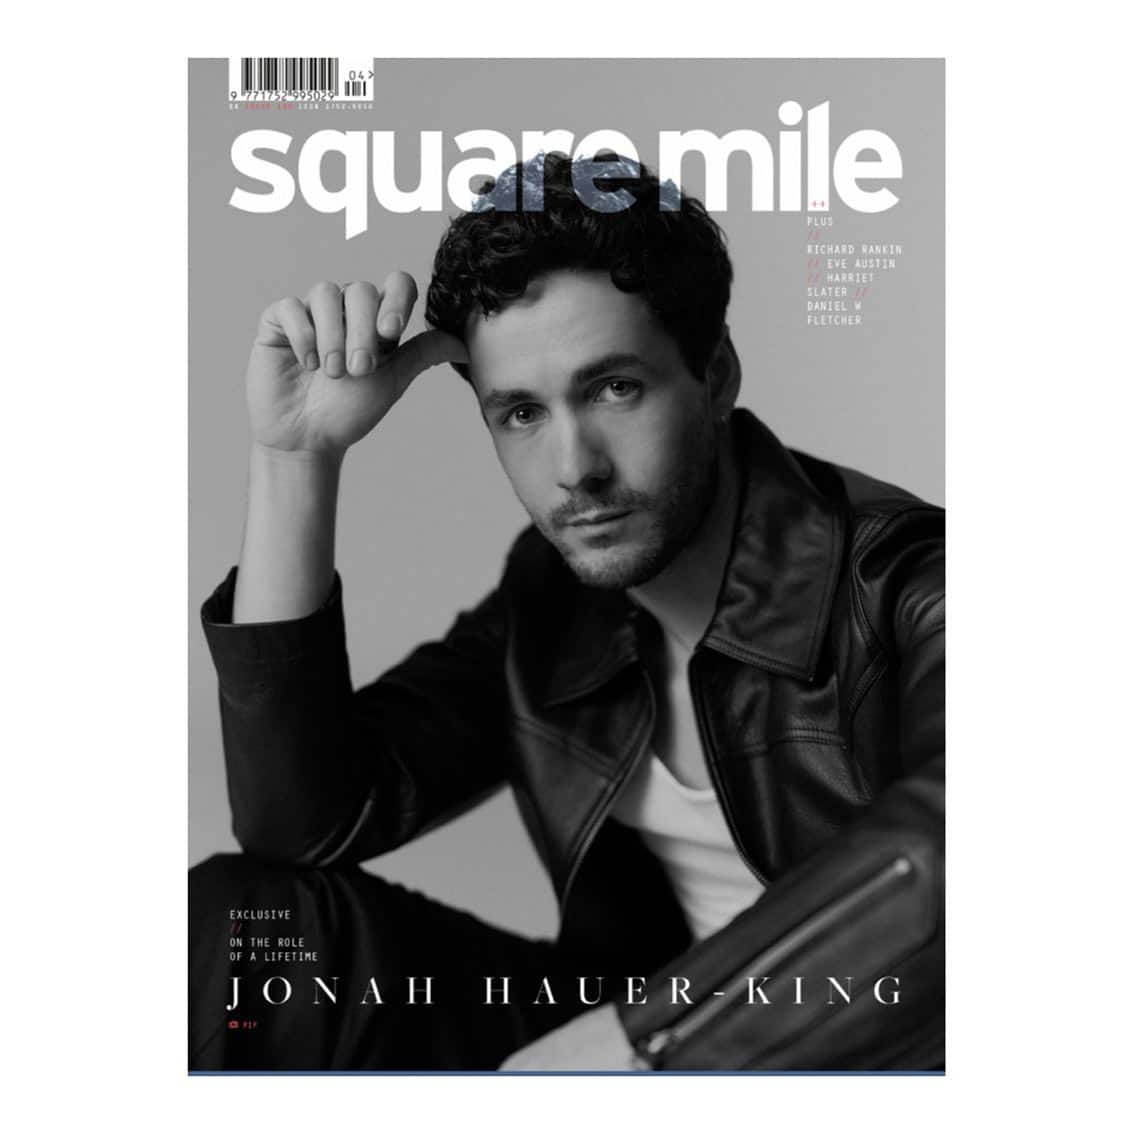 @jonahhauerking covers the latest issue of @squaremile, speaking about all things on @skytv @peacock 
.
.
.

Photography: @bypip 
Styling: @chrisbrownstylist 
Styling Assistant: @incabayley 
Grooming: @knightjosh 
✍️ @maxwilliams26 

.
.
.